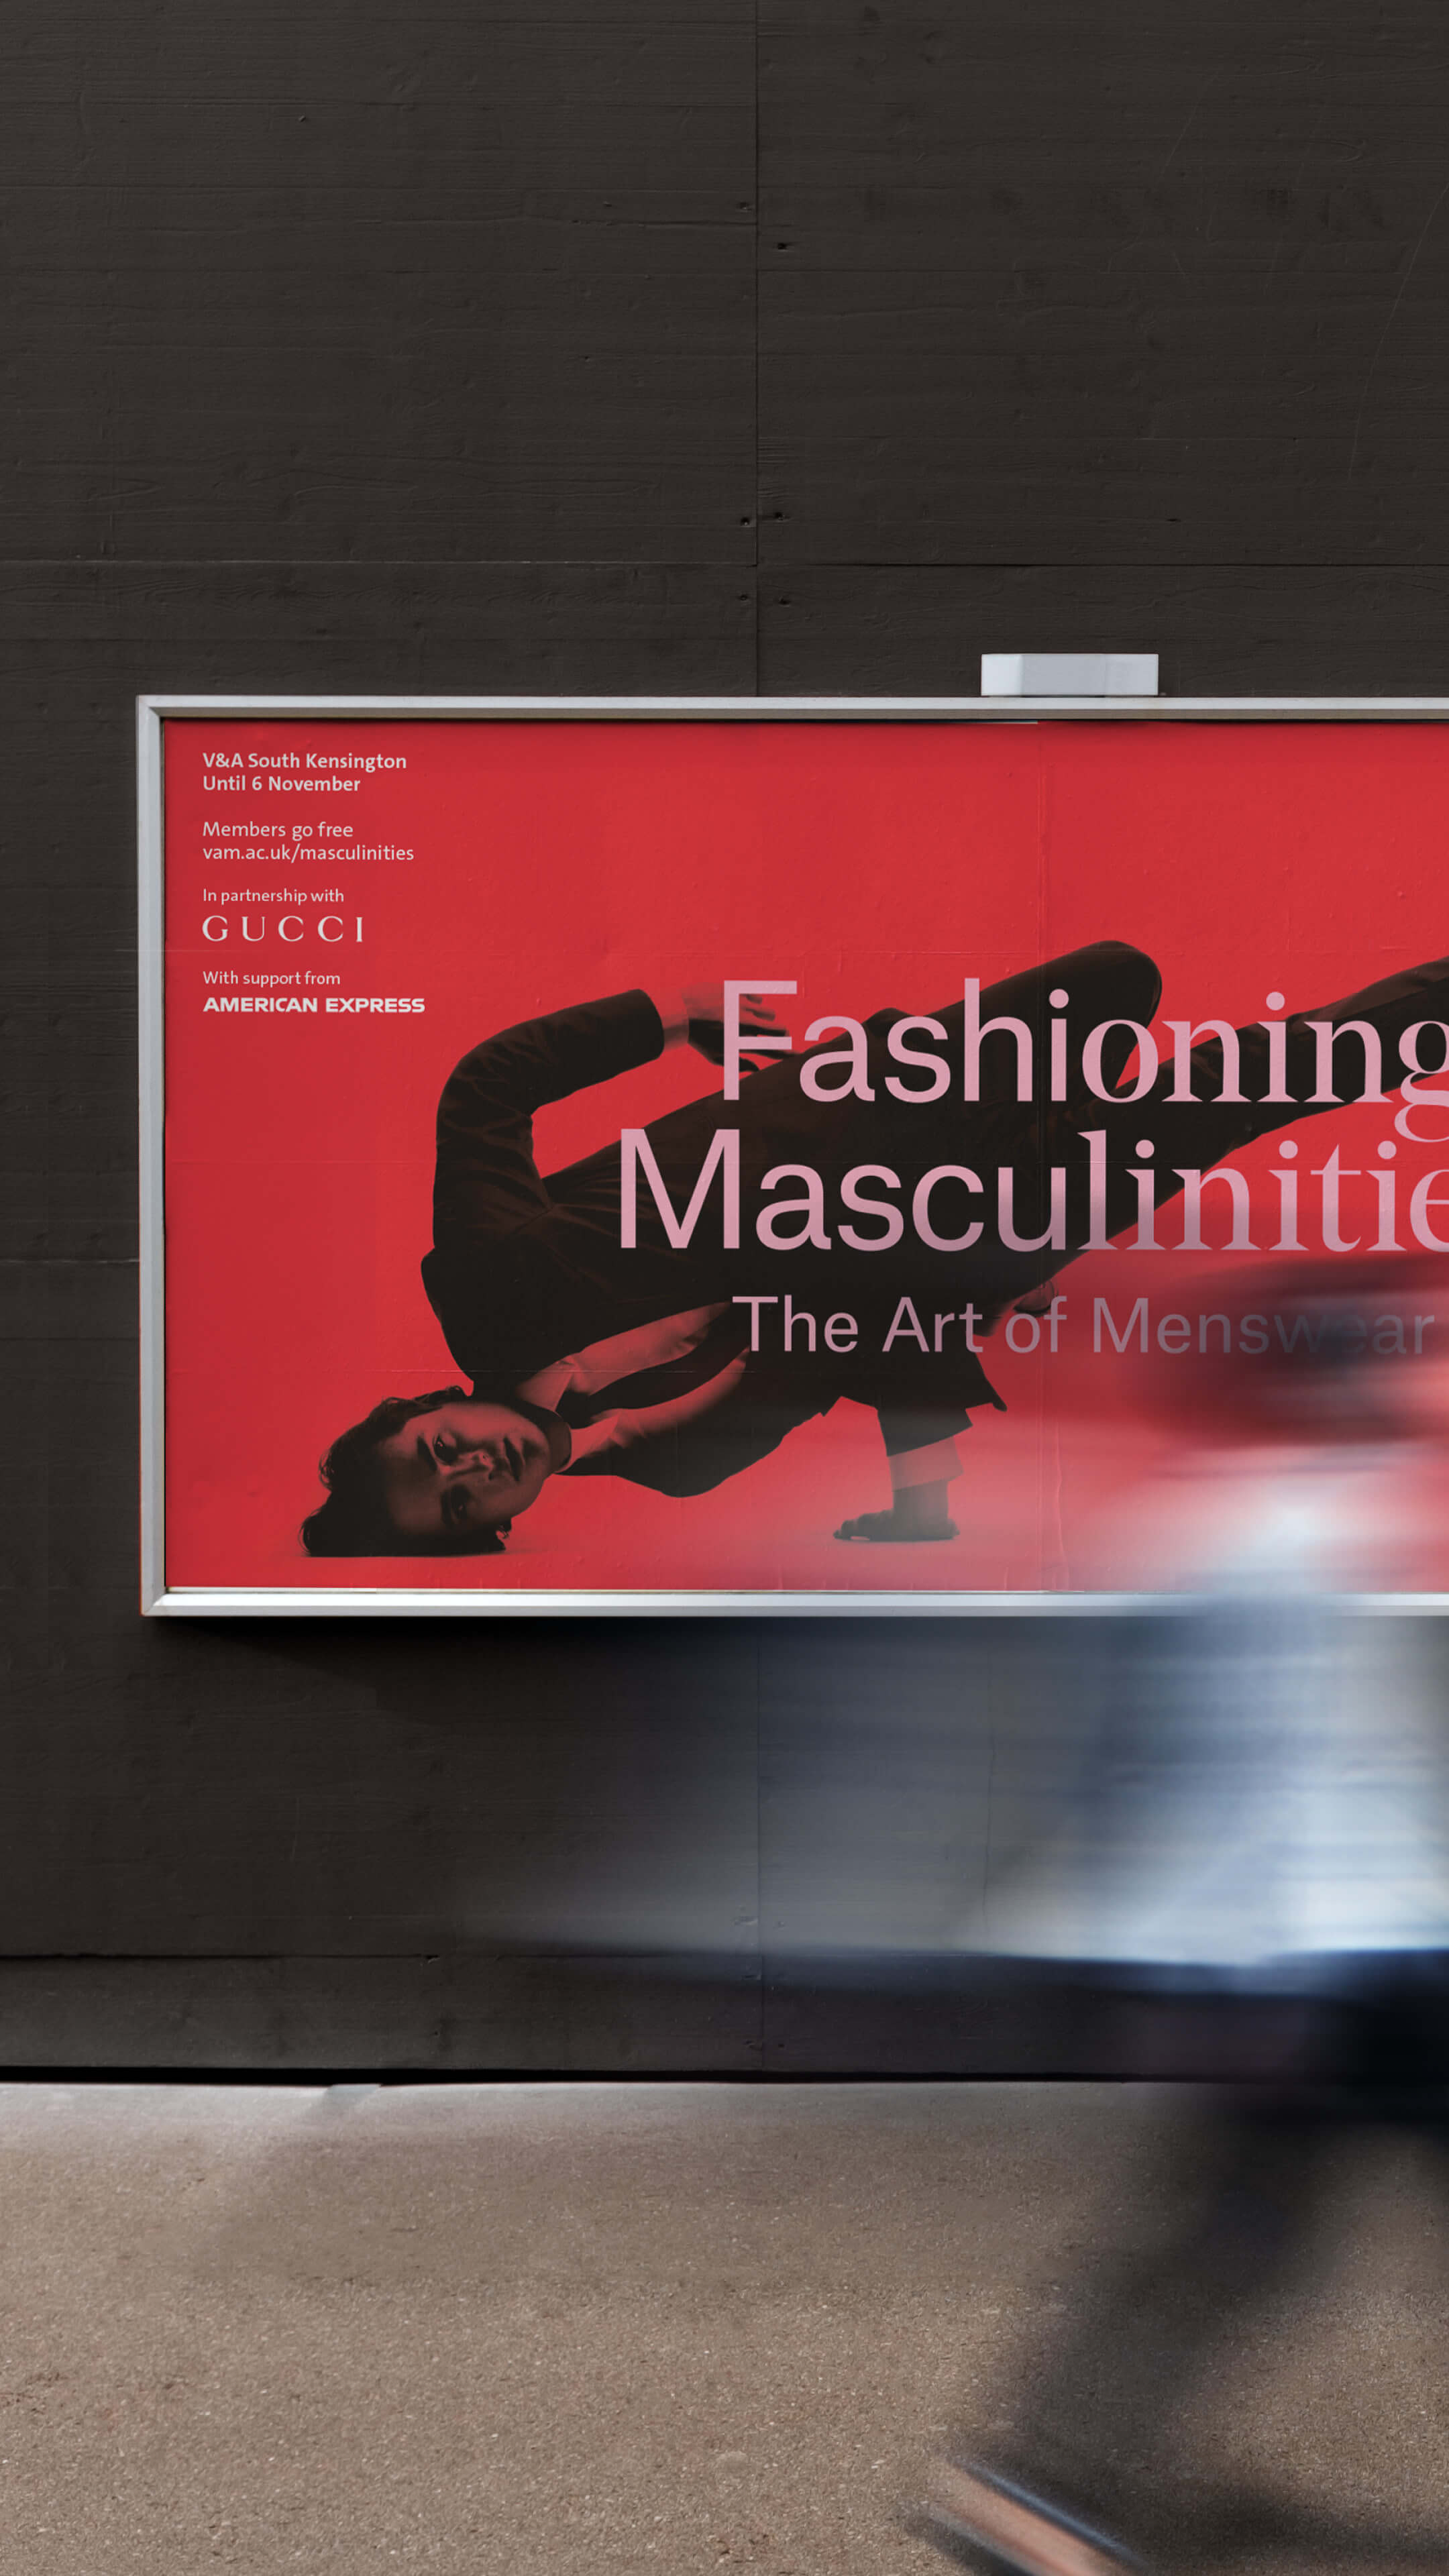 The V&A Fashioning Masculinities Campaign By Hingston Studio, In